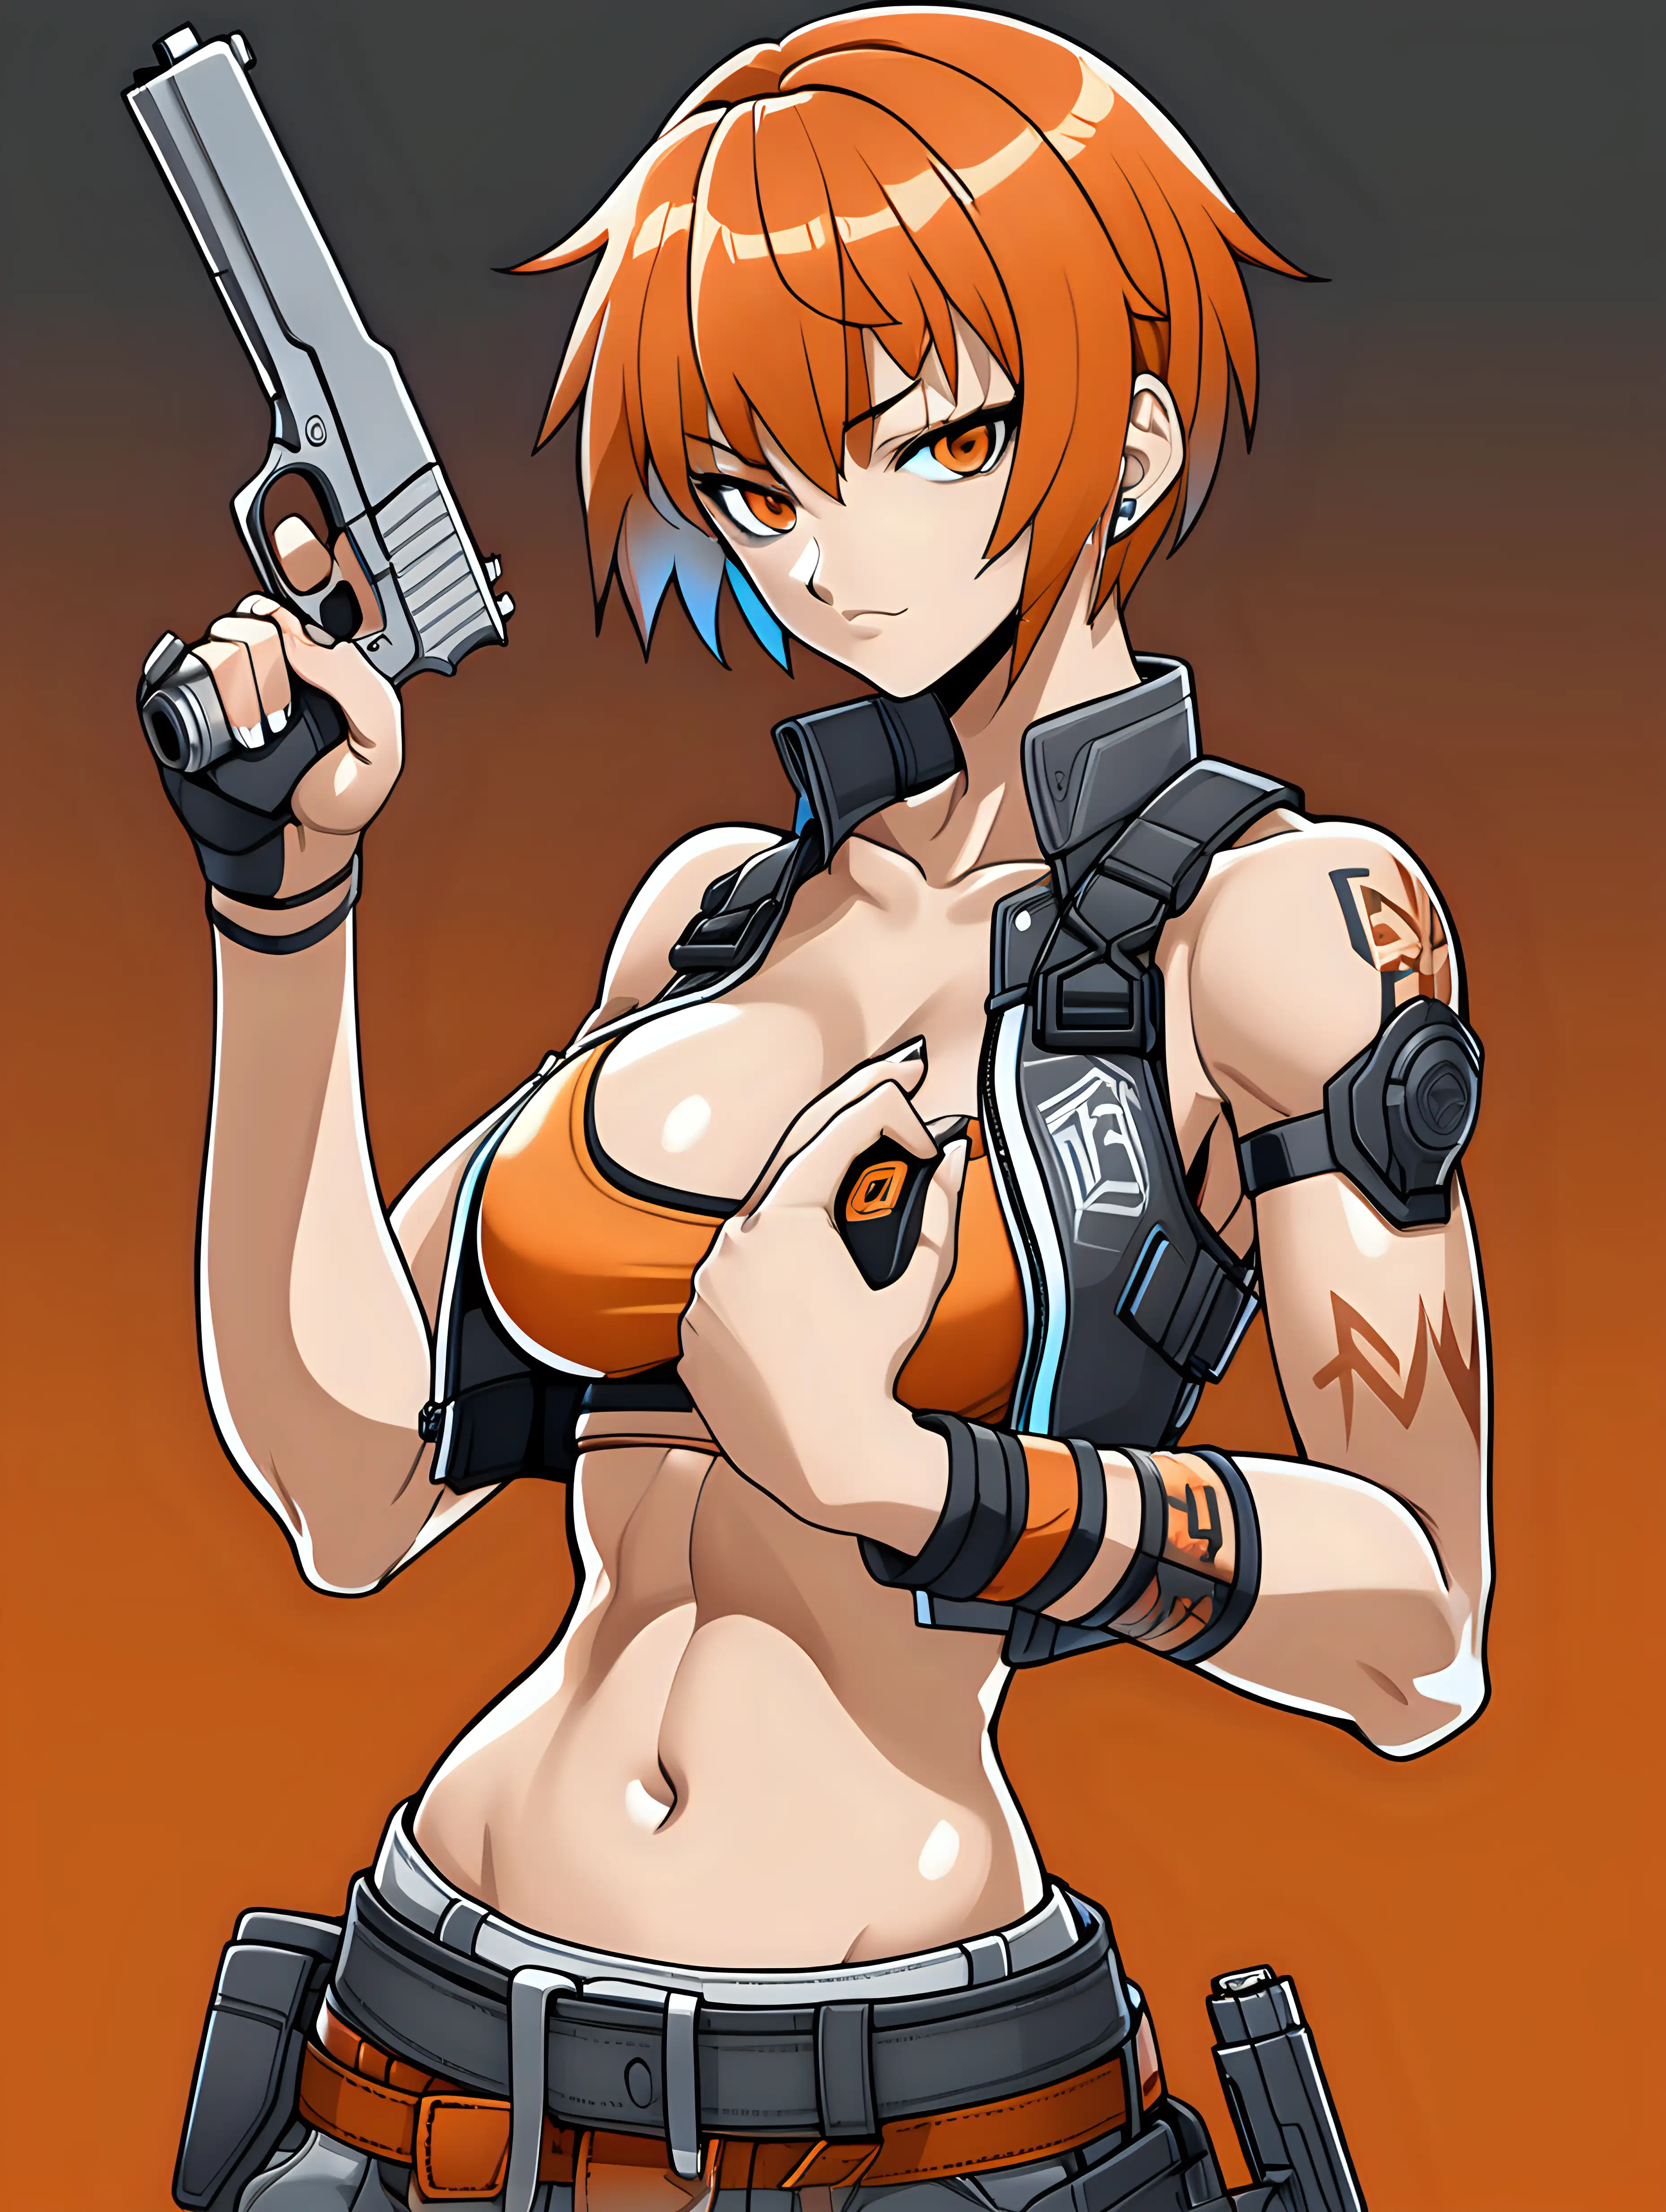 anime cyberpunk woman, tight bra top, exposed muscular midriff, mischievous expression, intimidating, tomboy, short hair, standing tall, holding handgun, dynamic pose, shadow aura, orange theme, partially armored, shonen style